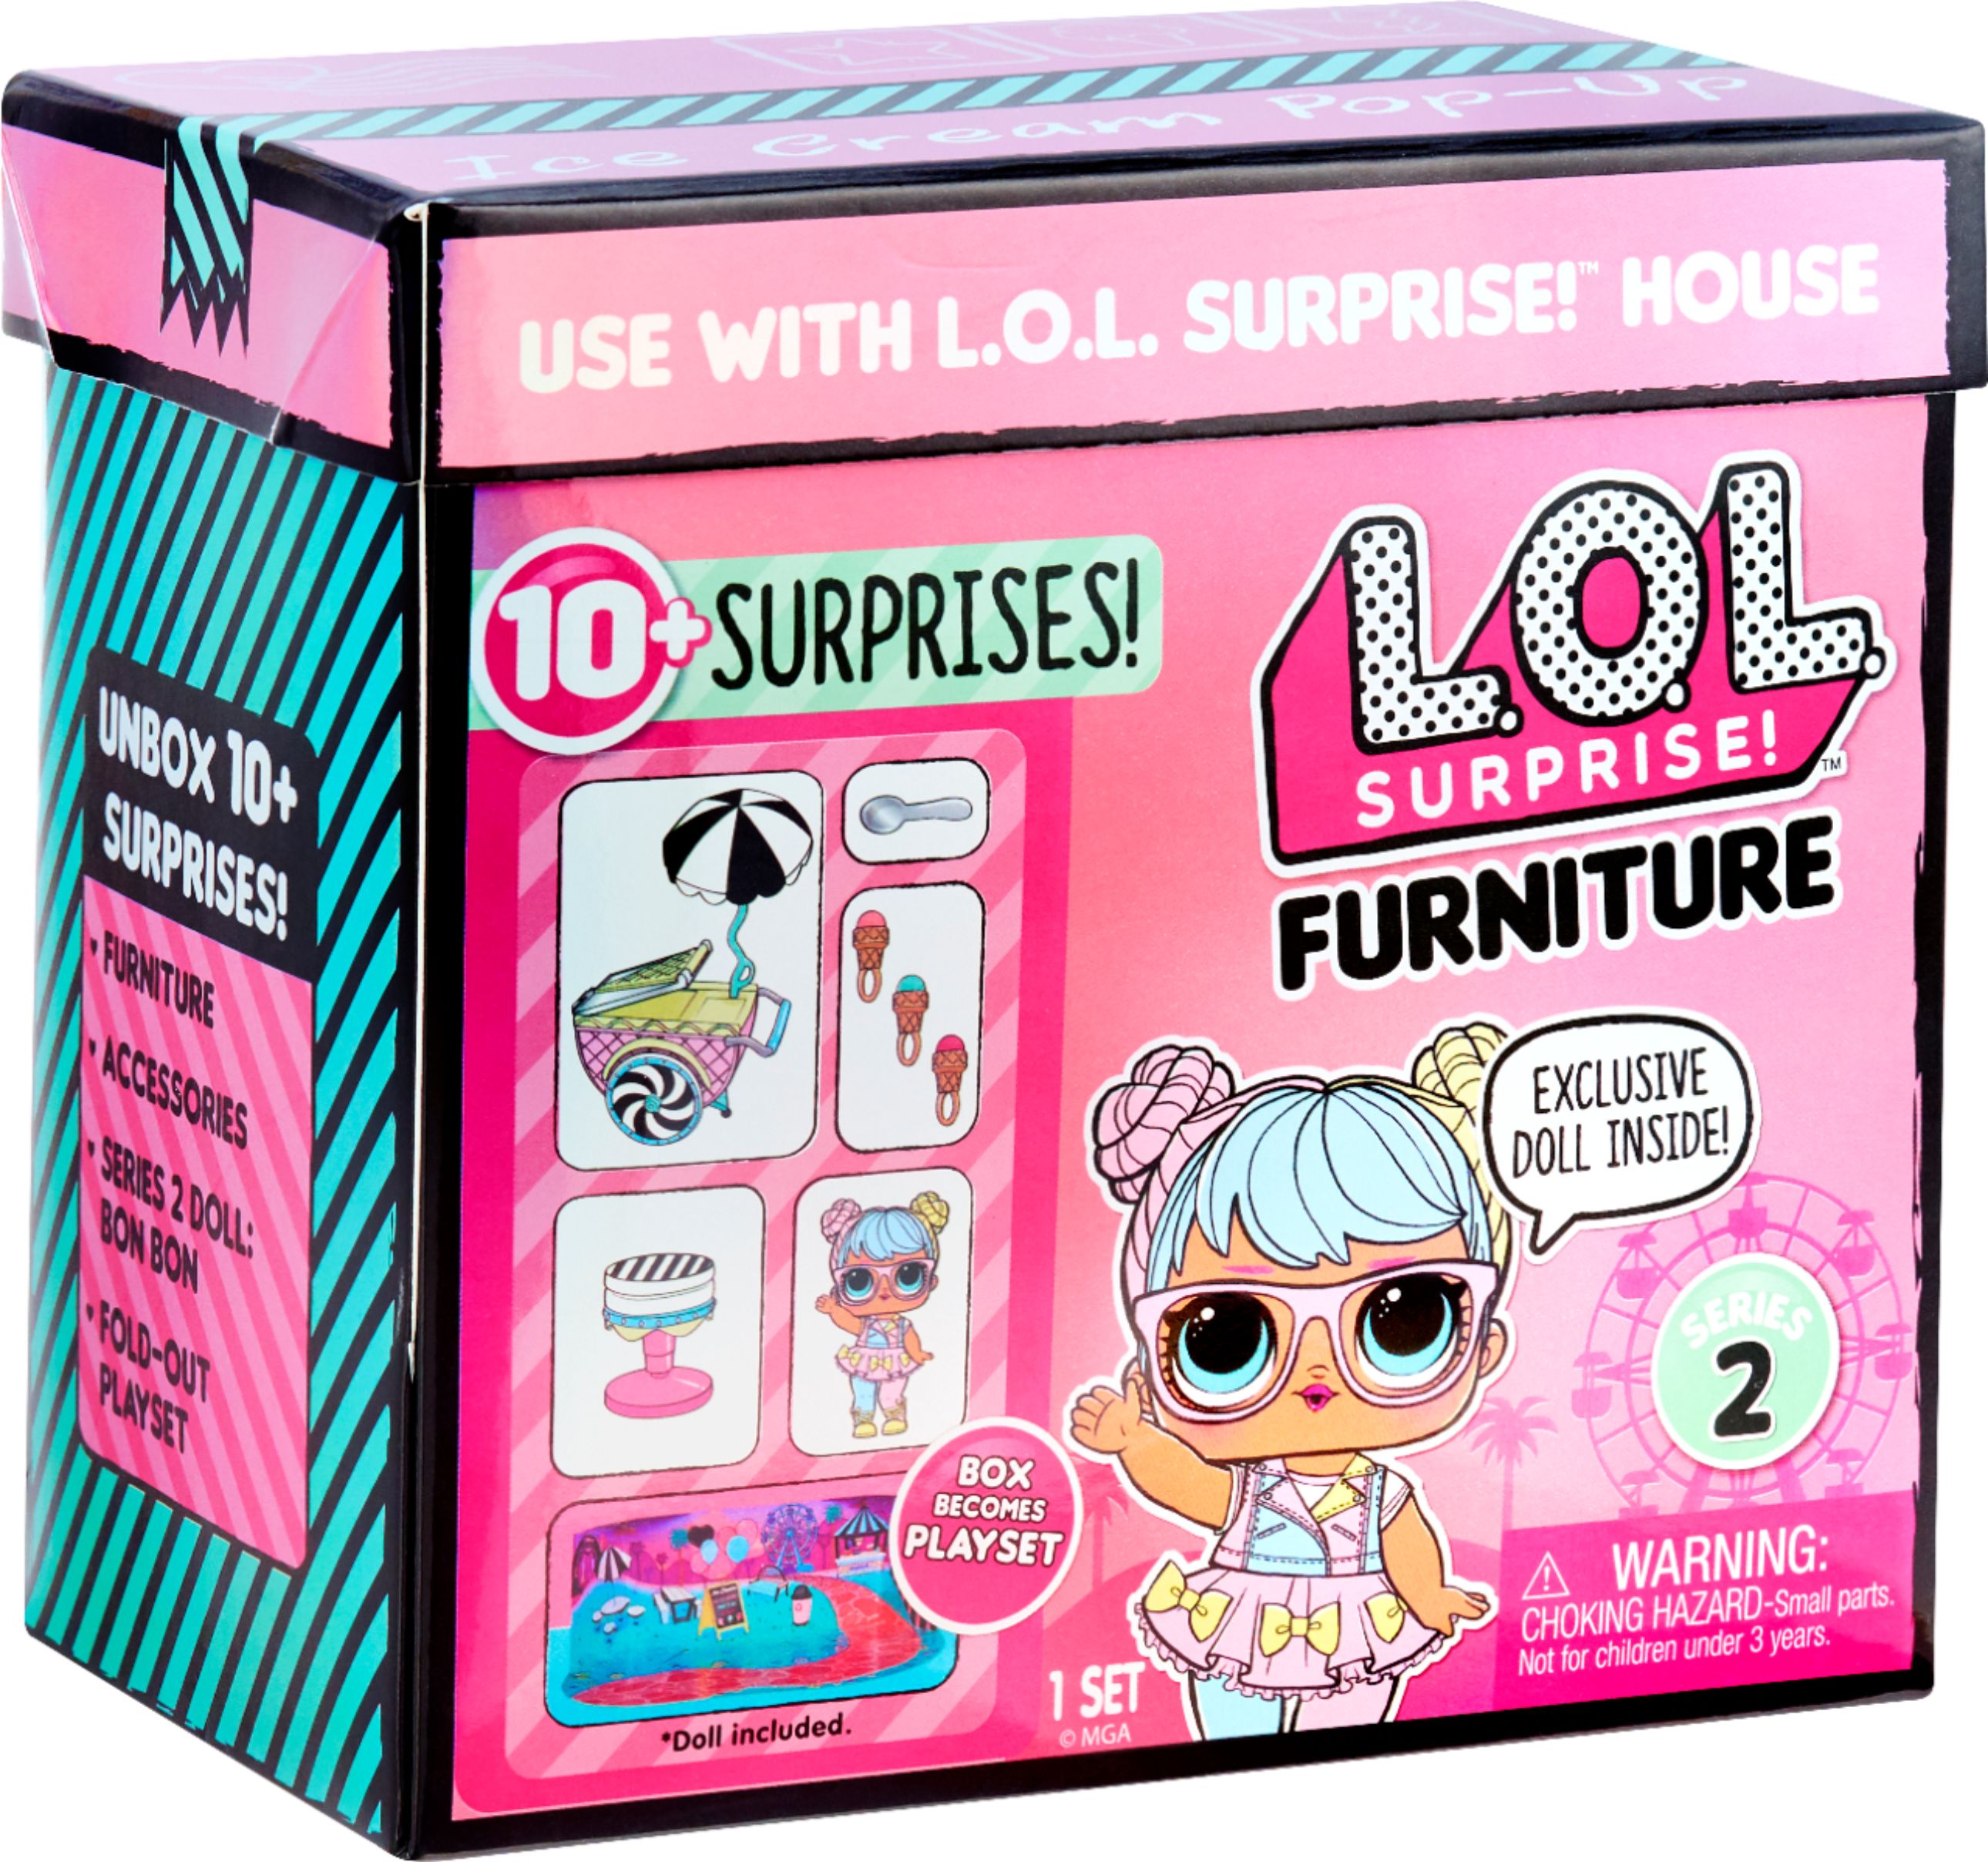 L.O.L Surprise Style 3 Furniture with Doll